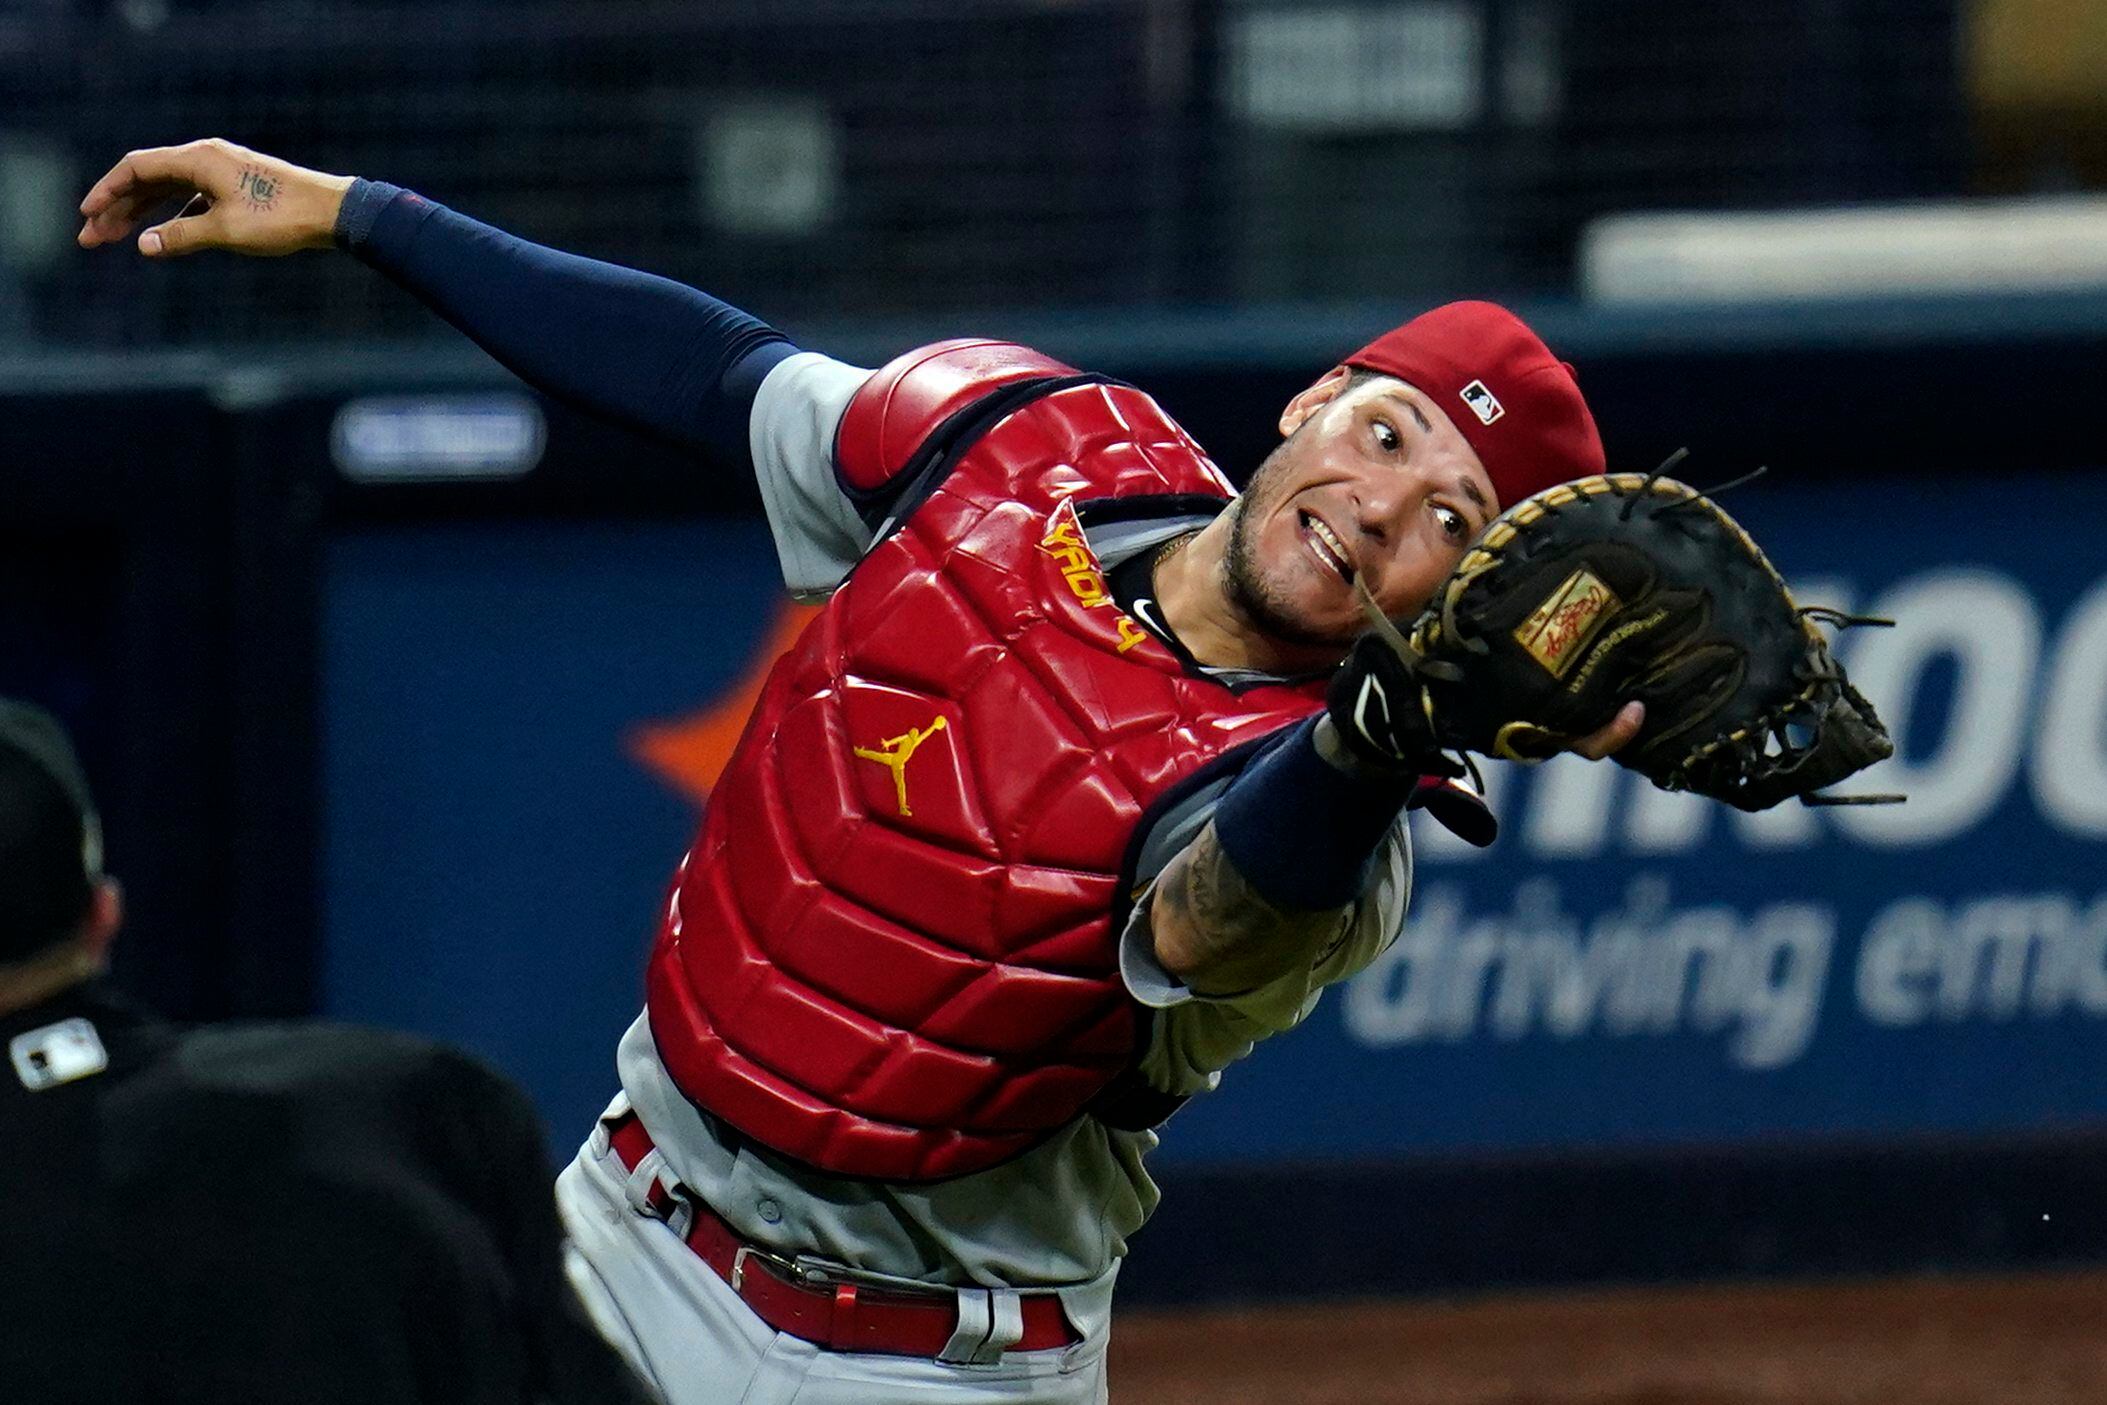 Yadier Molina wore some pretty nifty catching gear in the All-Star Game -  The Boston Globe